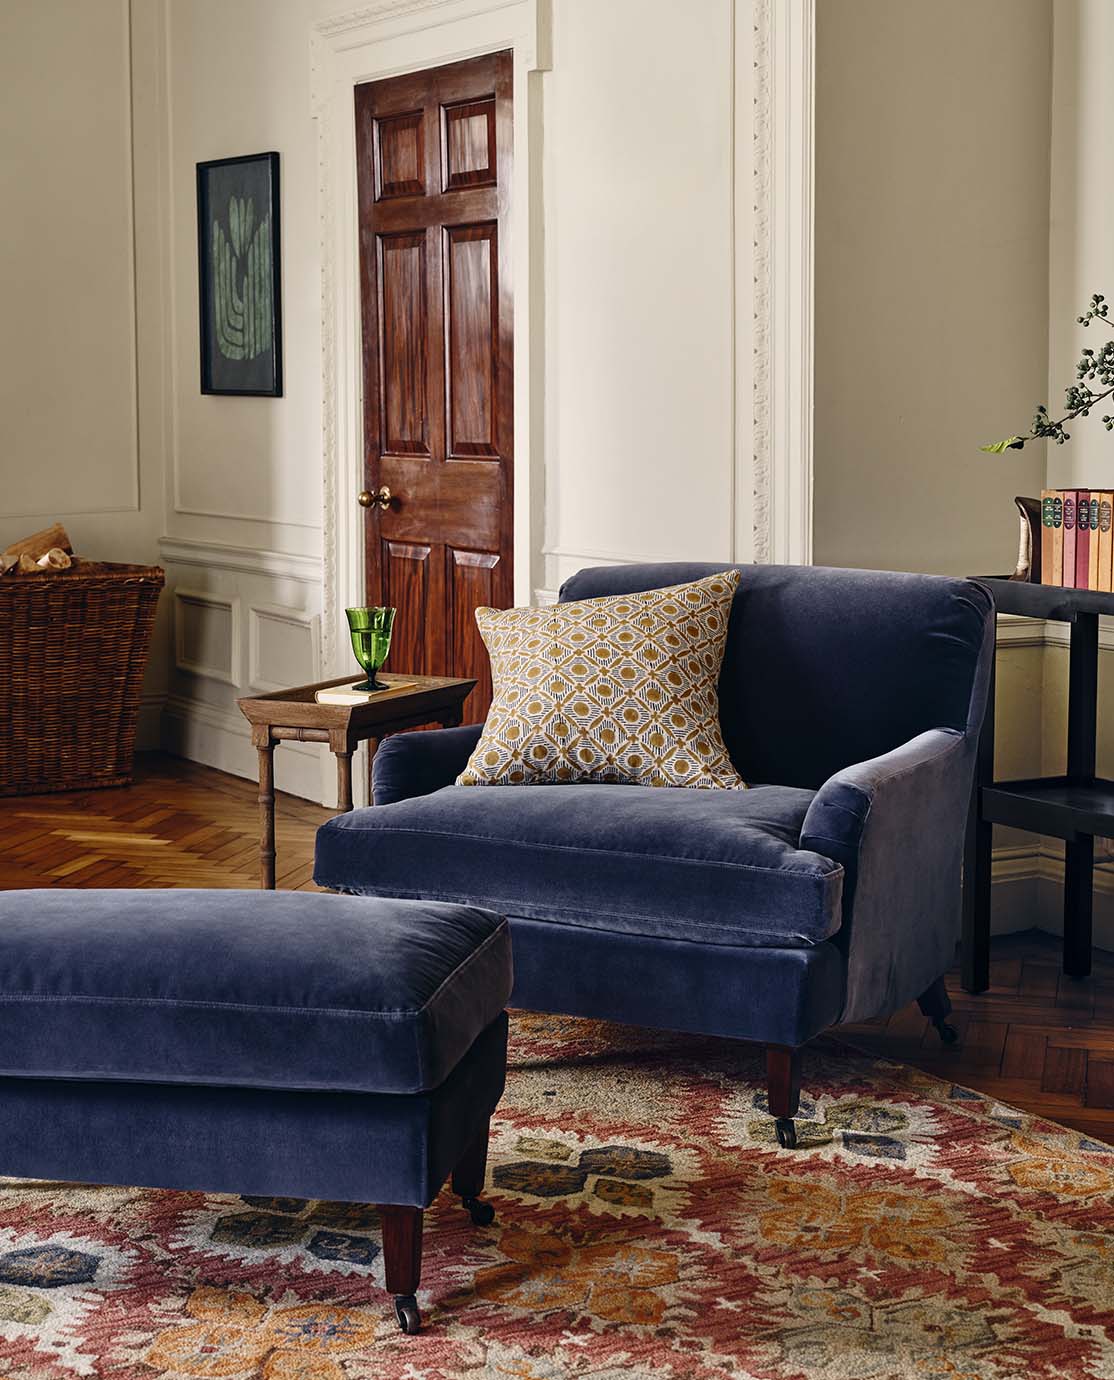 A sitting room featuring a blue velvet armchair and a footstool with a patterned rug underneath. Behind is a wooden side-table and a dark wooden door.